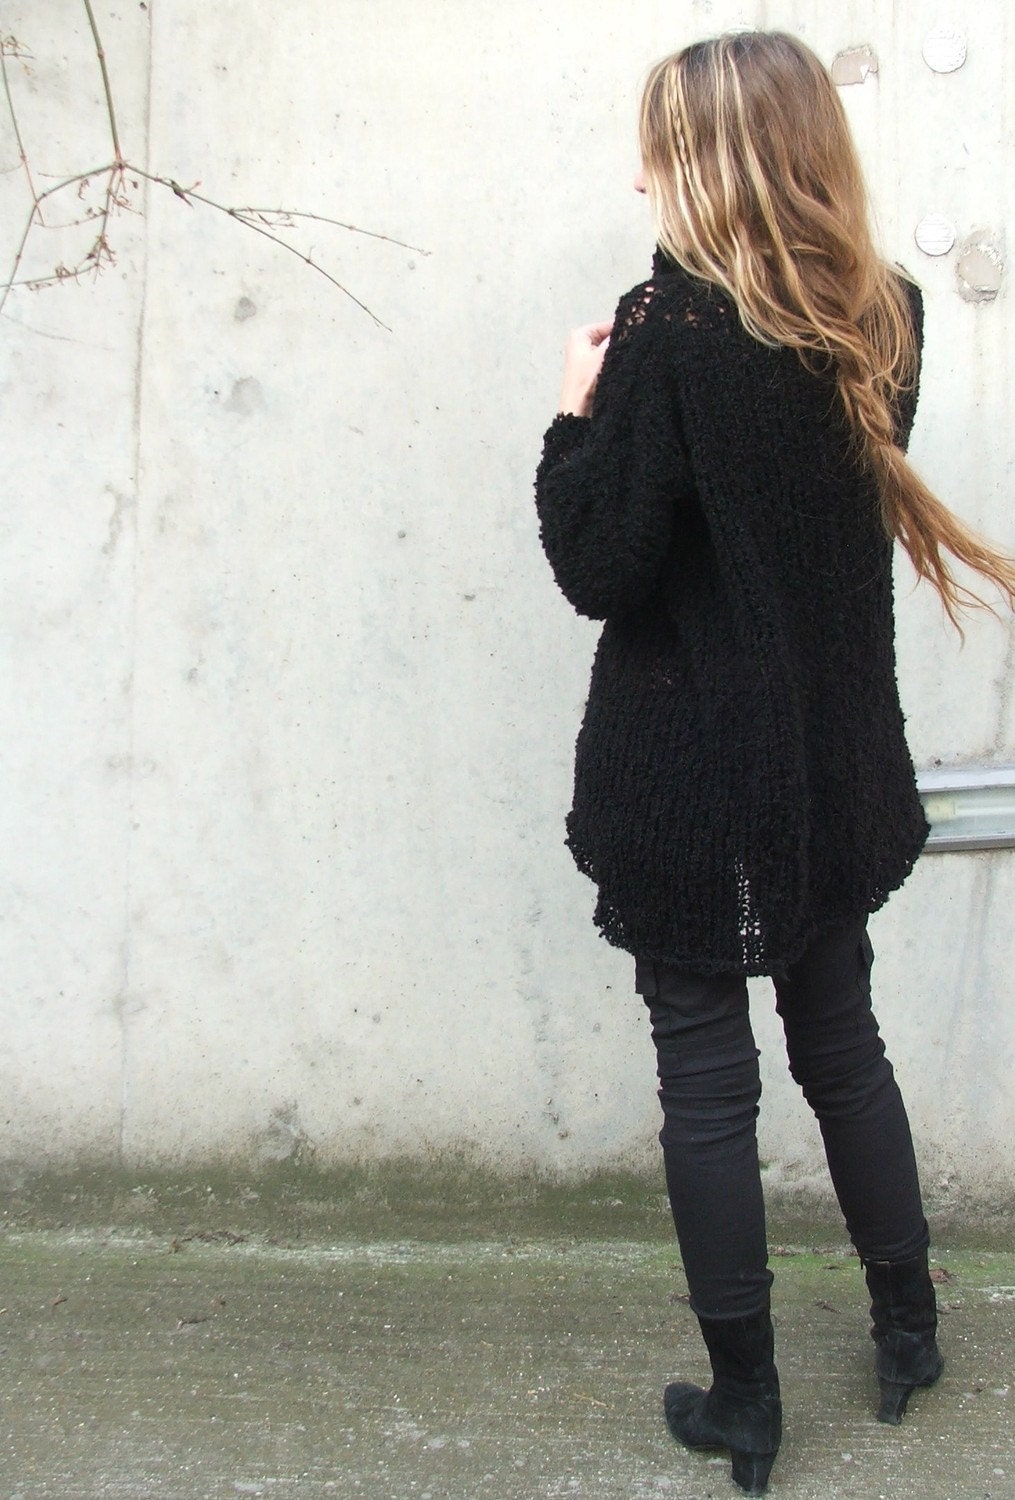 The iLE AiYE warm comfy sweater in Black